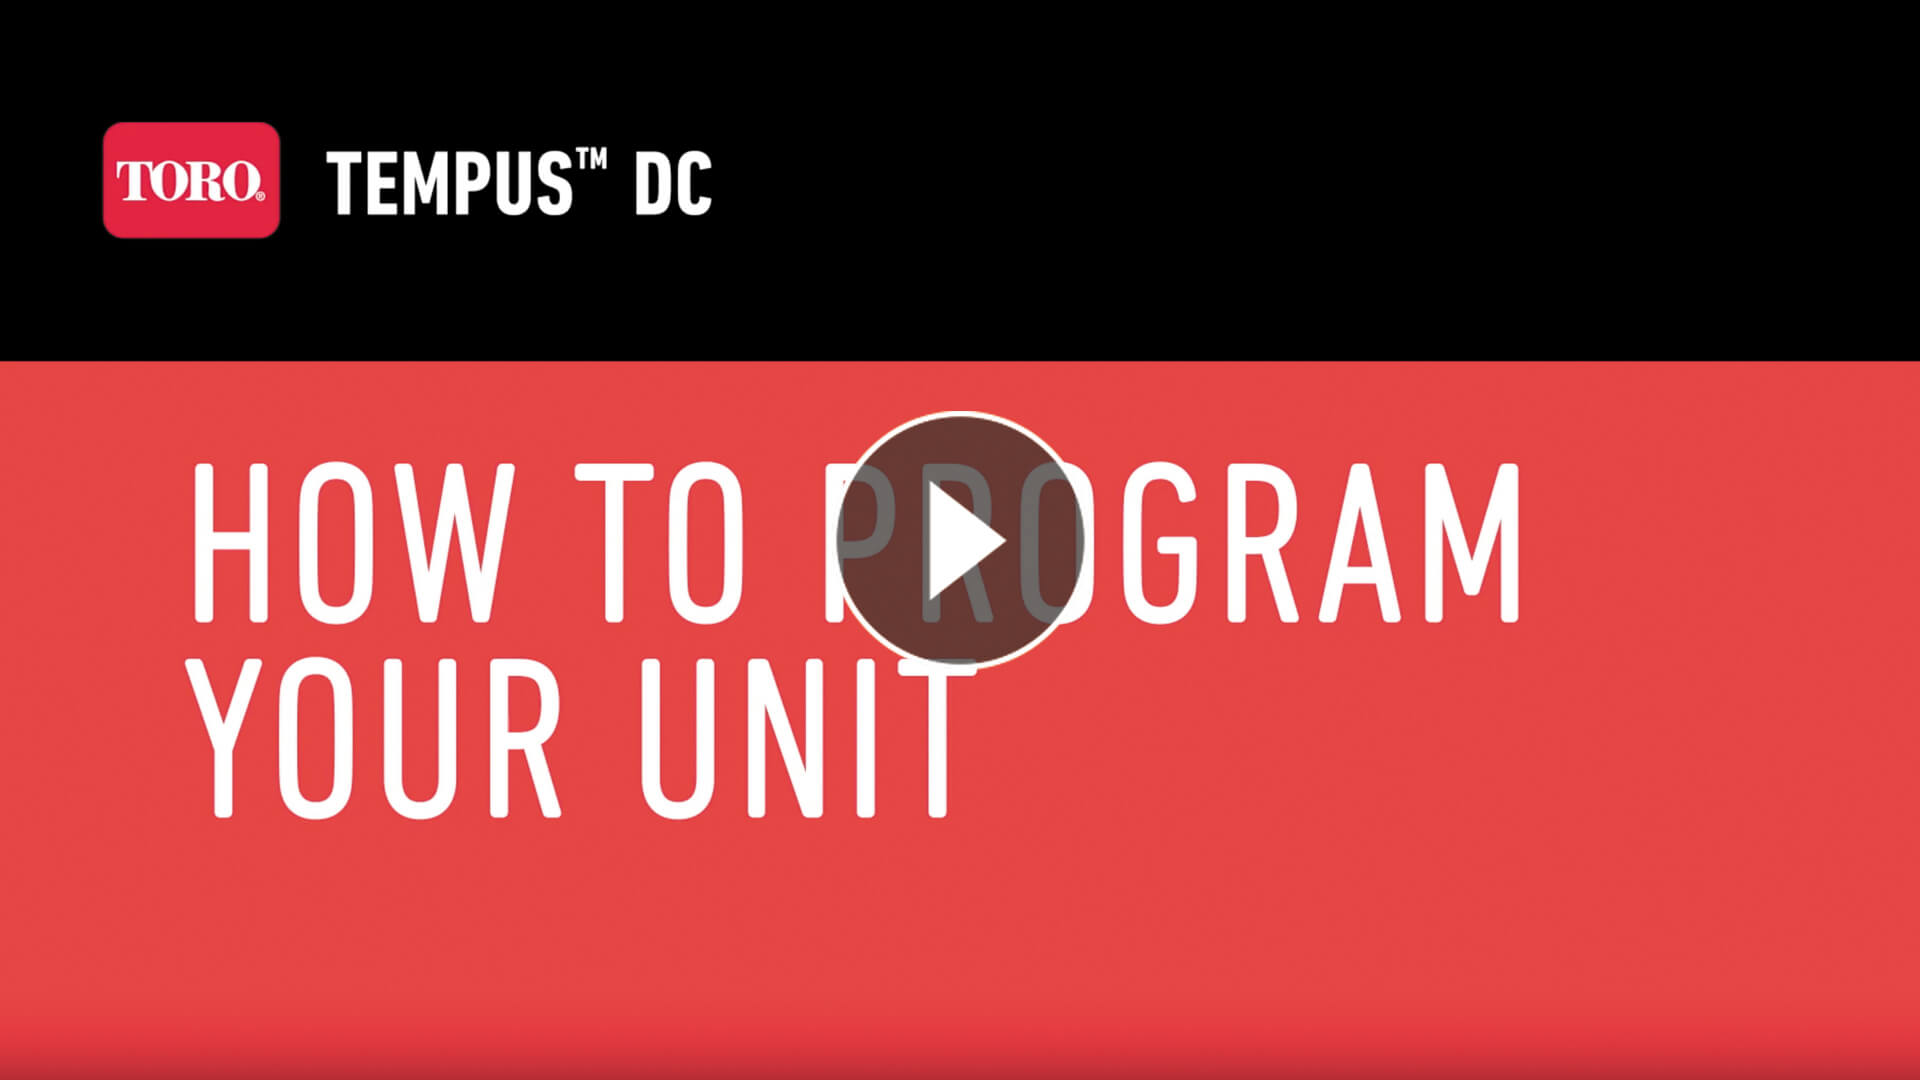   How to Program Your Unit